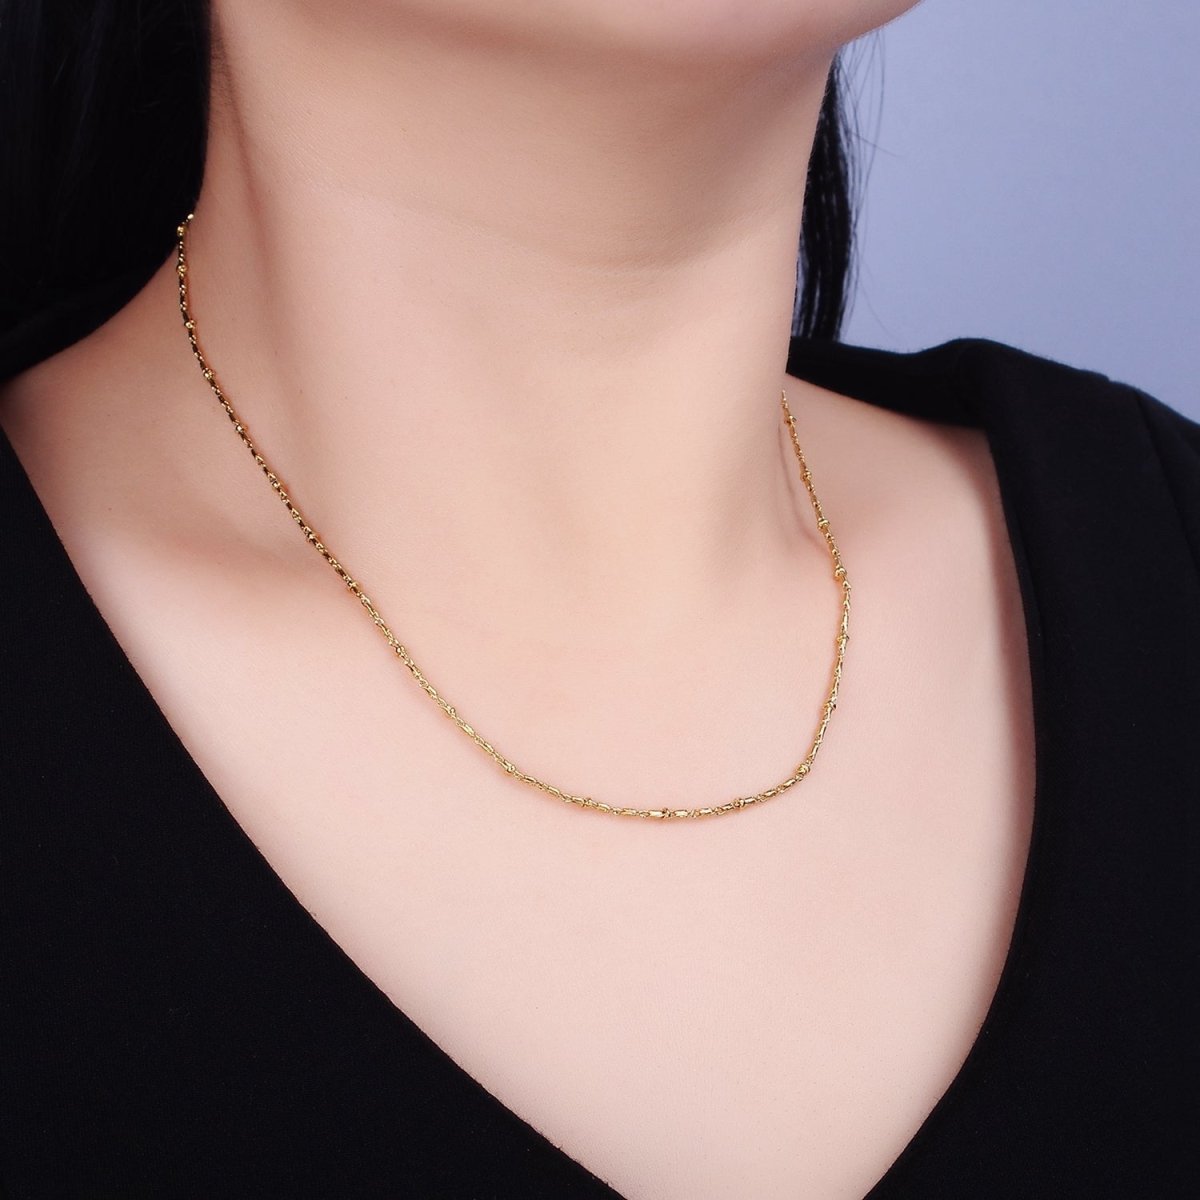 24K Gold Filled Tube Chain With Gold Beads For Wholesale Necklace Dainty Satellite Chain Jewelry Making Supplies | WA-1857 WA-1858 Clearance Pricing - DLUXCA